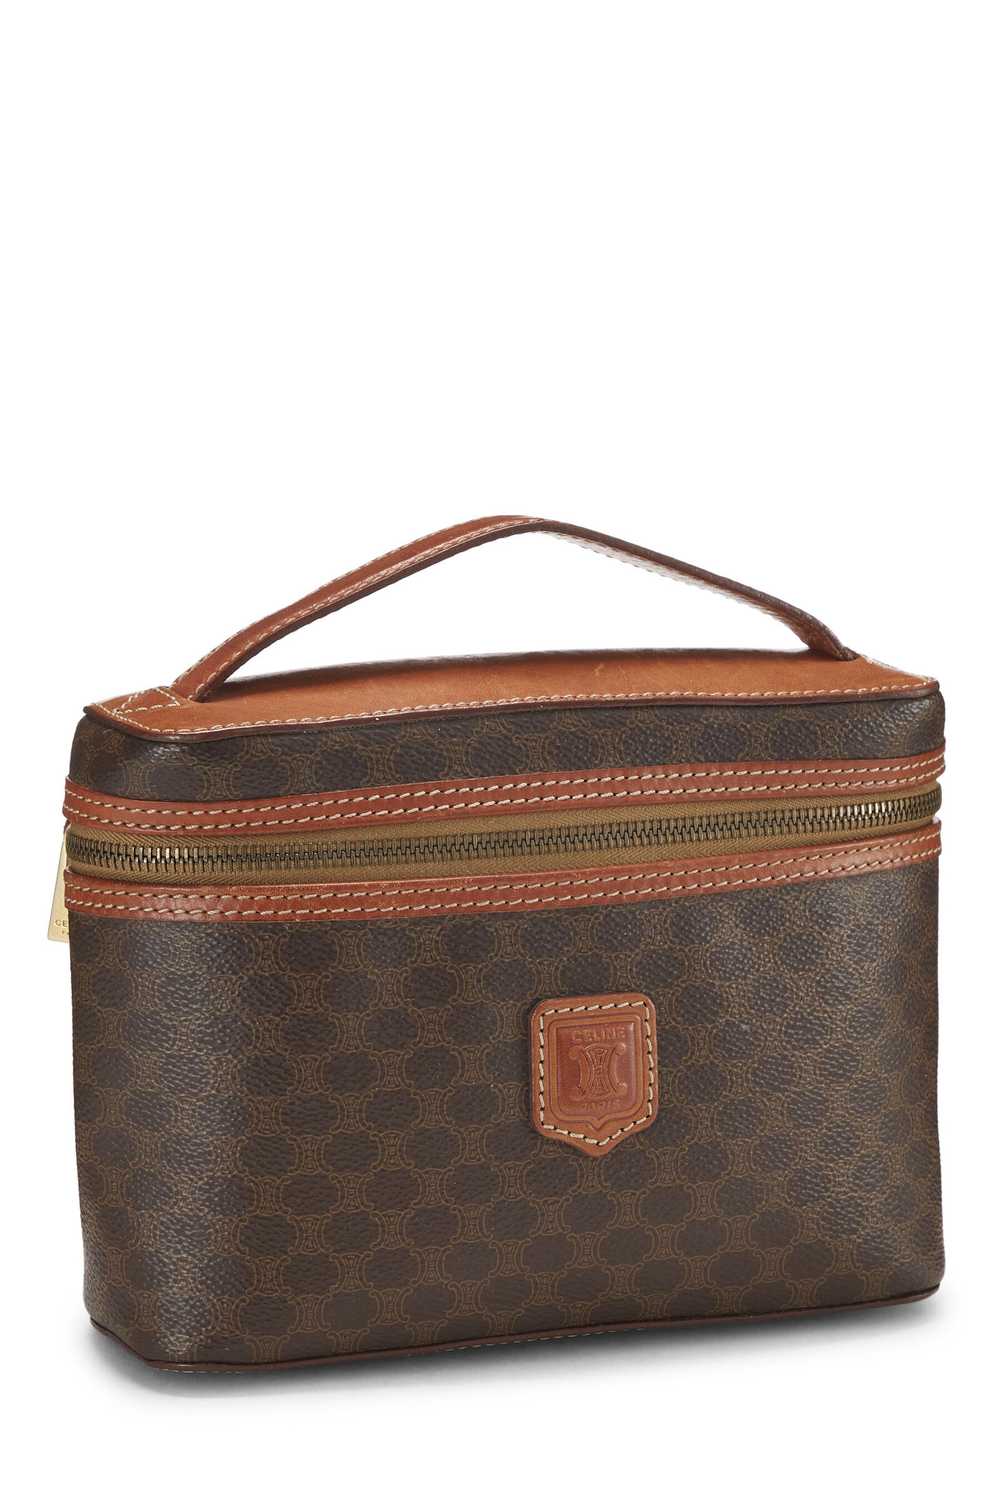 Brown Coated Canvas Macadam Toiletry Bag - image 2